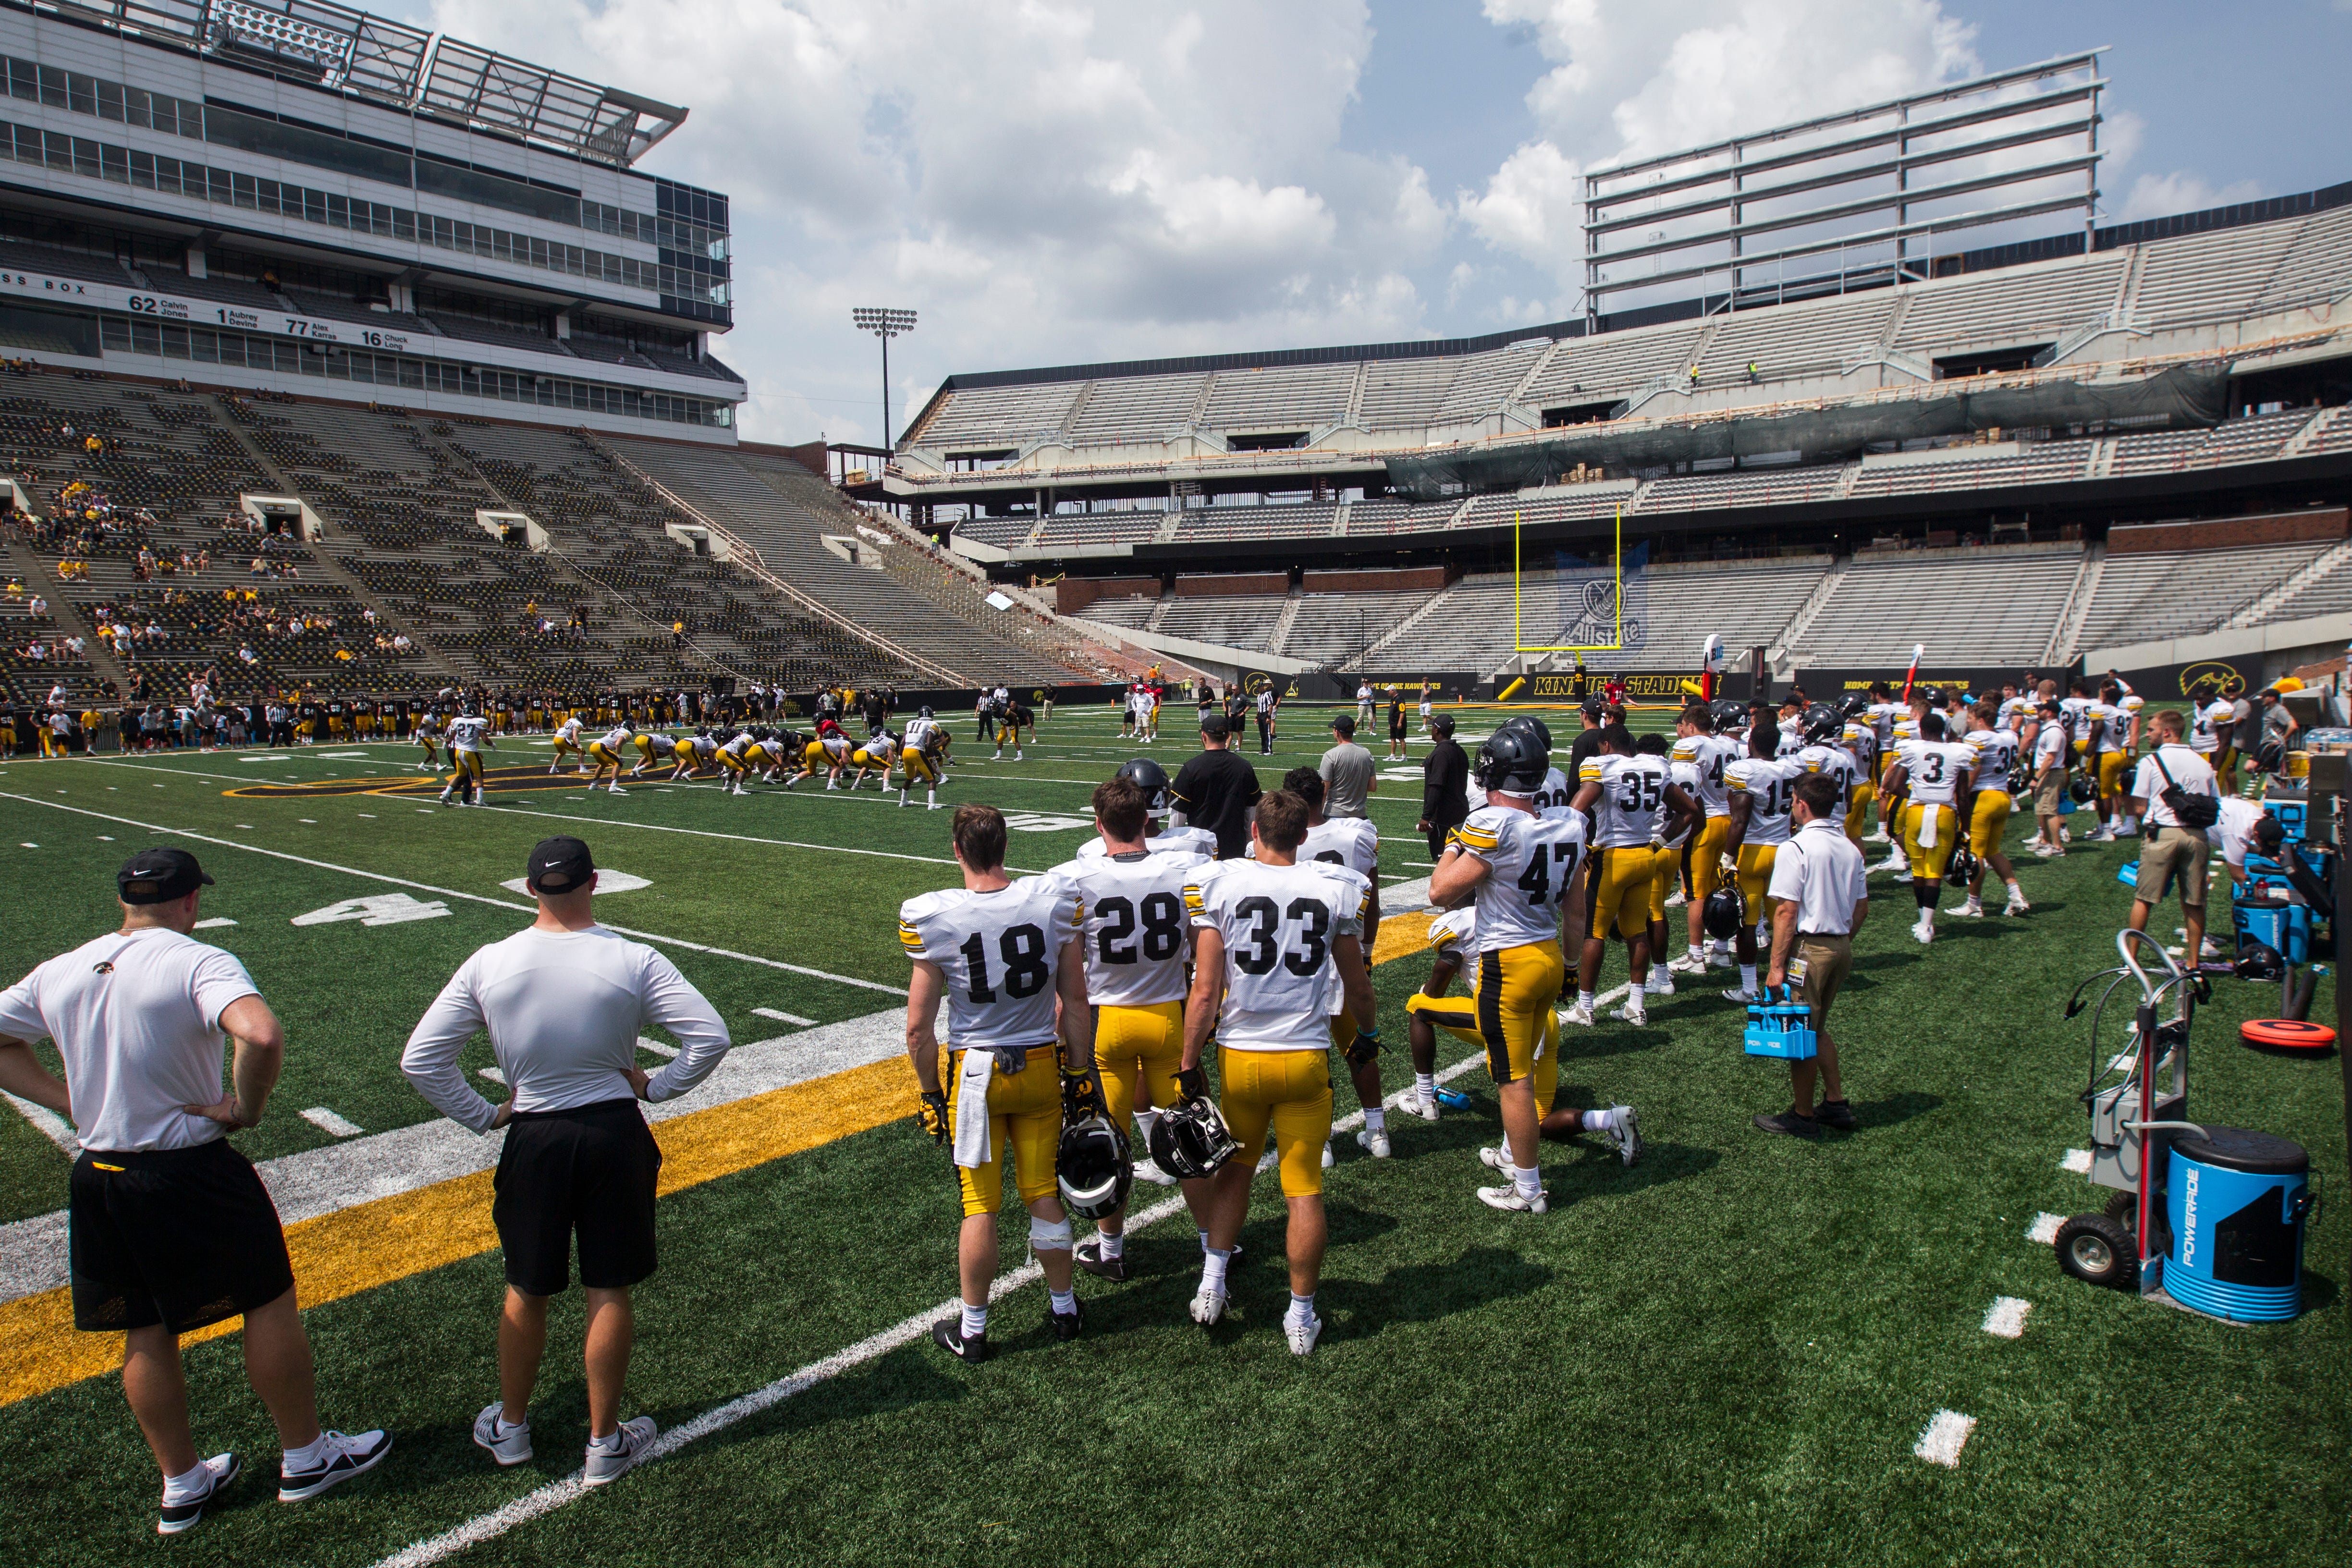 Iowa's defensive stands on the sidelines while construction continues in the north endzone during a Kids Day practice on Saturday, Aug. 11, 2018, at Kinnick Stadium in Iowa City.